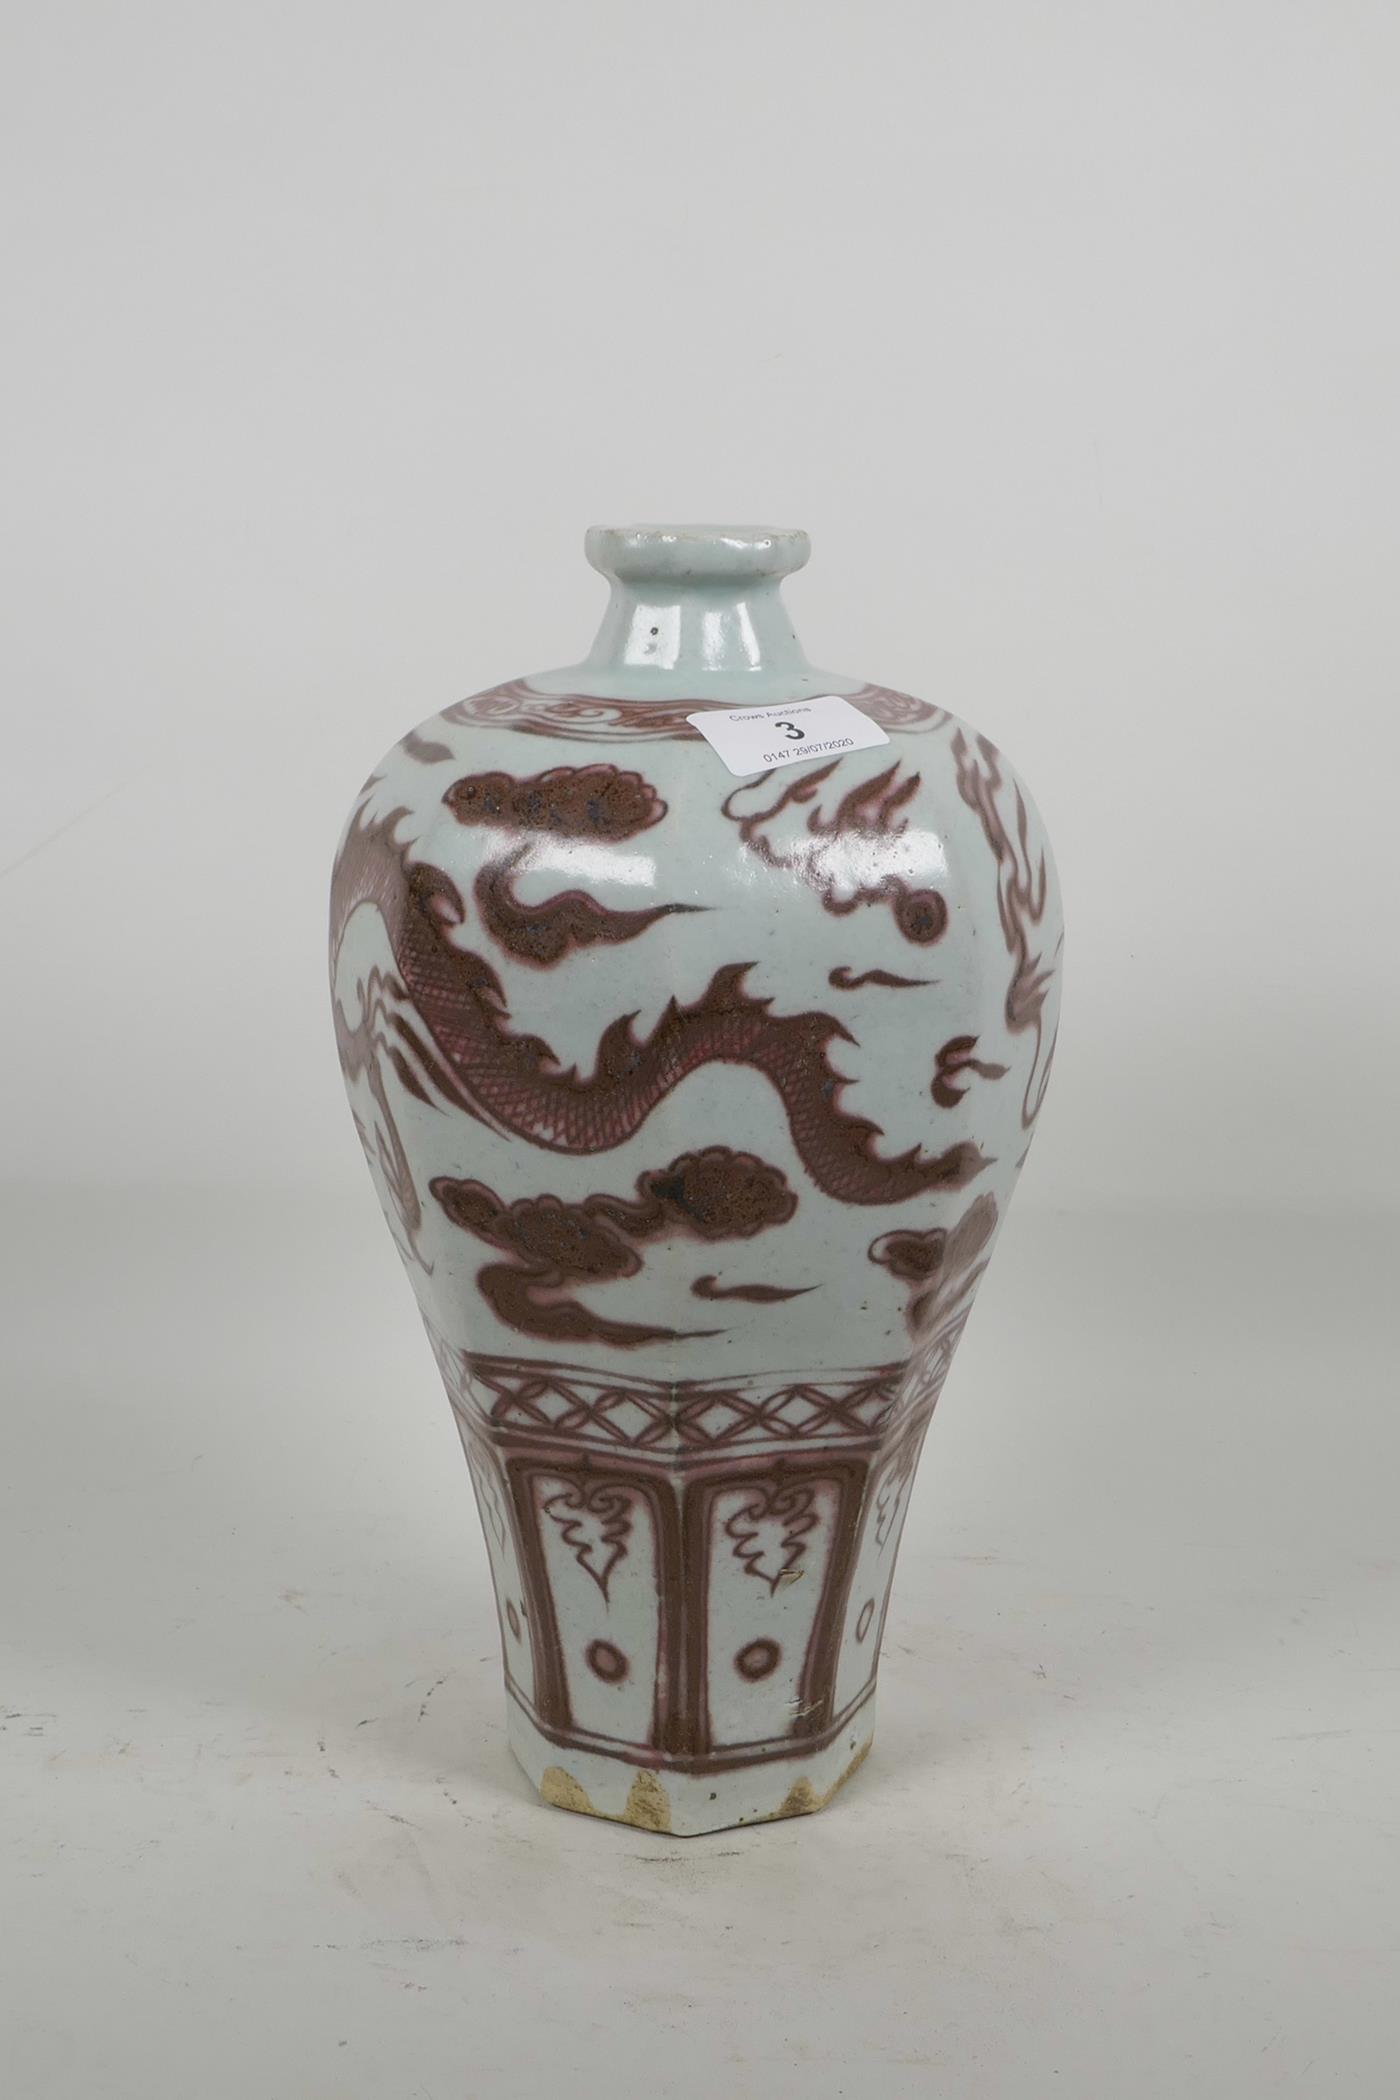 A Chinese porcelain vase with ironstone red dragon decoration, 11½" high - Image 3 of 4